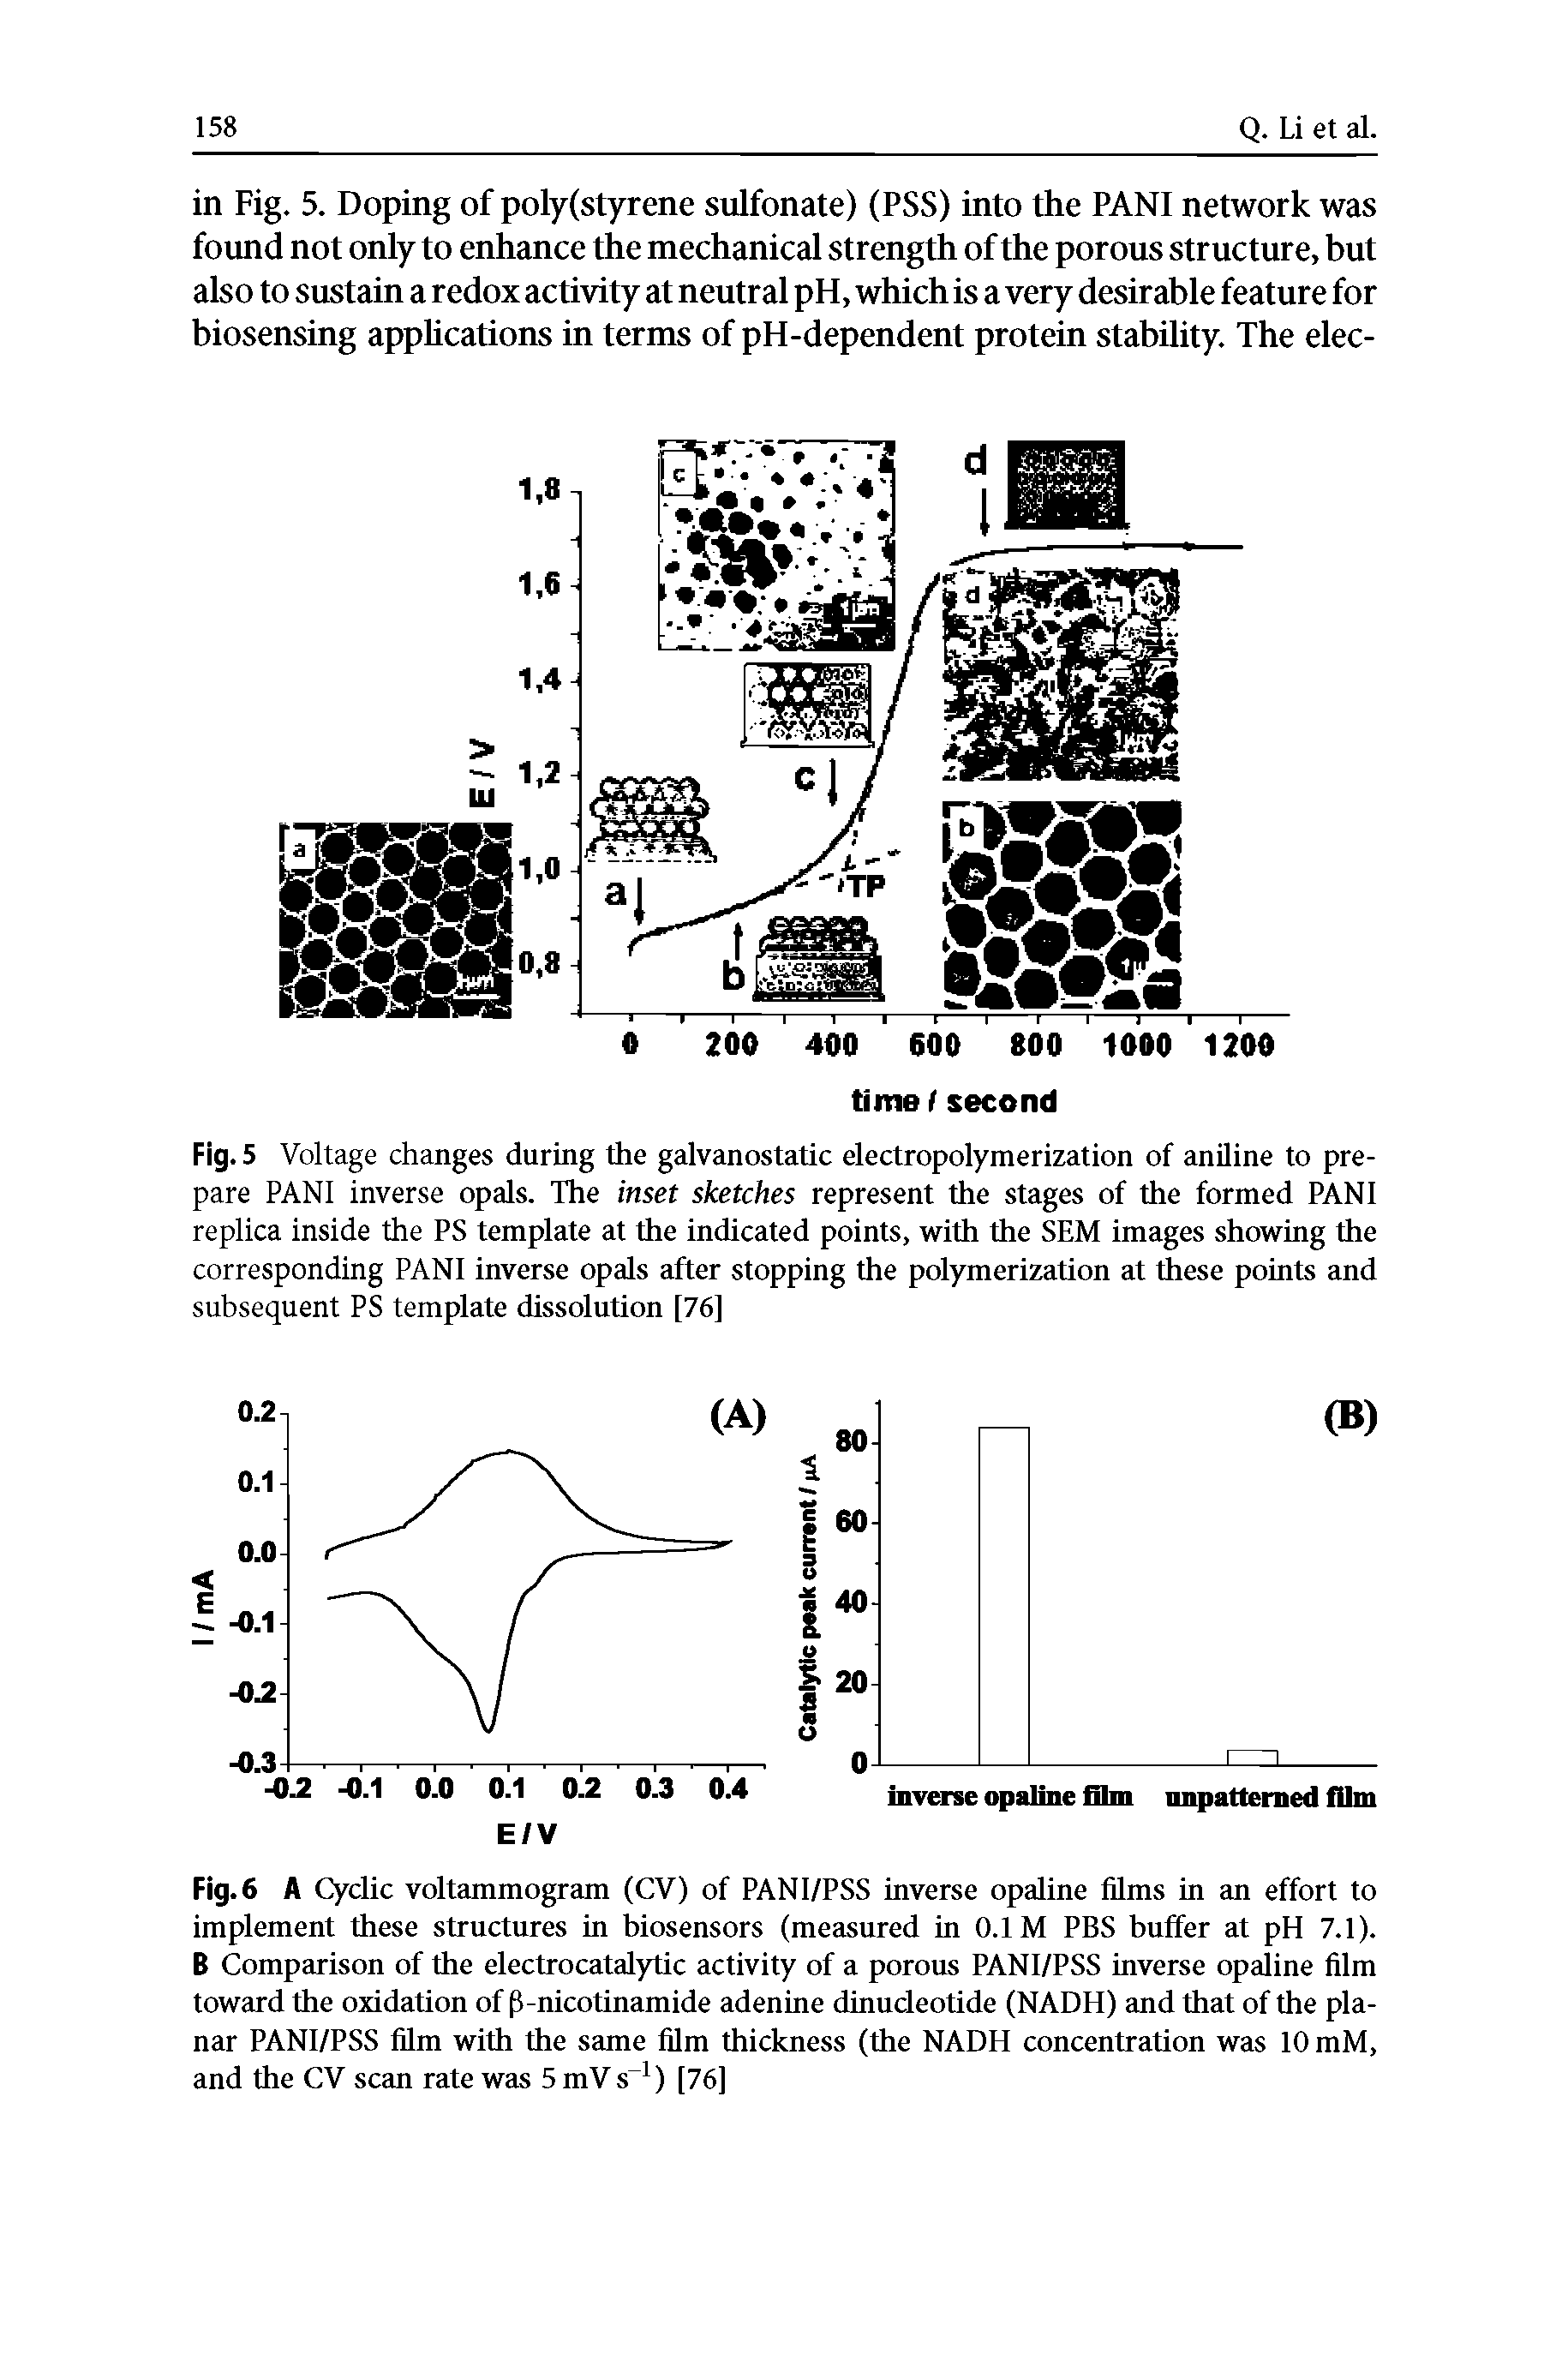 Fig. 5 Voltage changes during the galvanostatic electropolymerization of aniline to prepare PANI inverse opals. The inset sketches represent the stages of the formed PANI replica inside the PS template at the indicated points, with the SEM images showing the corresponding PANI inverse opals after stopping the polymerization at these points and subsequent PS template dissolution [76]...